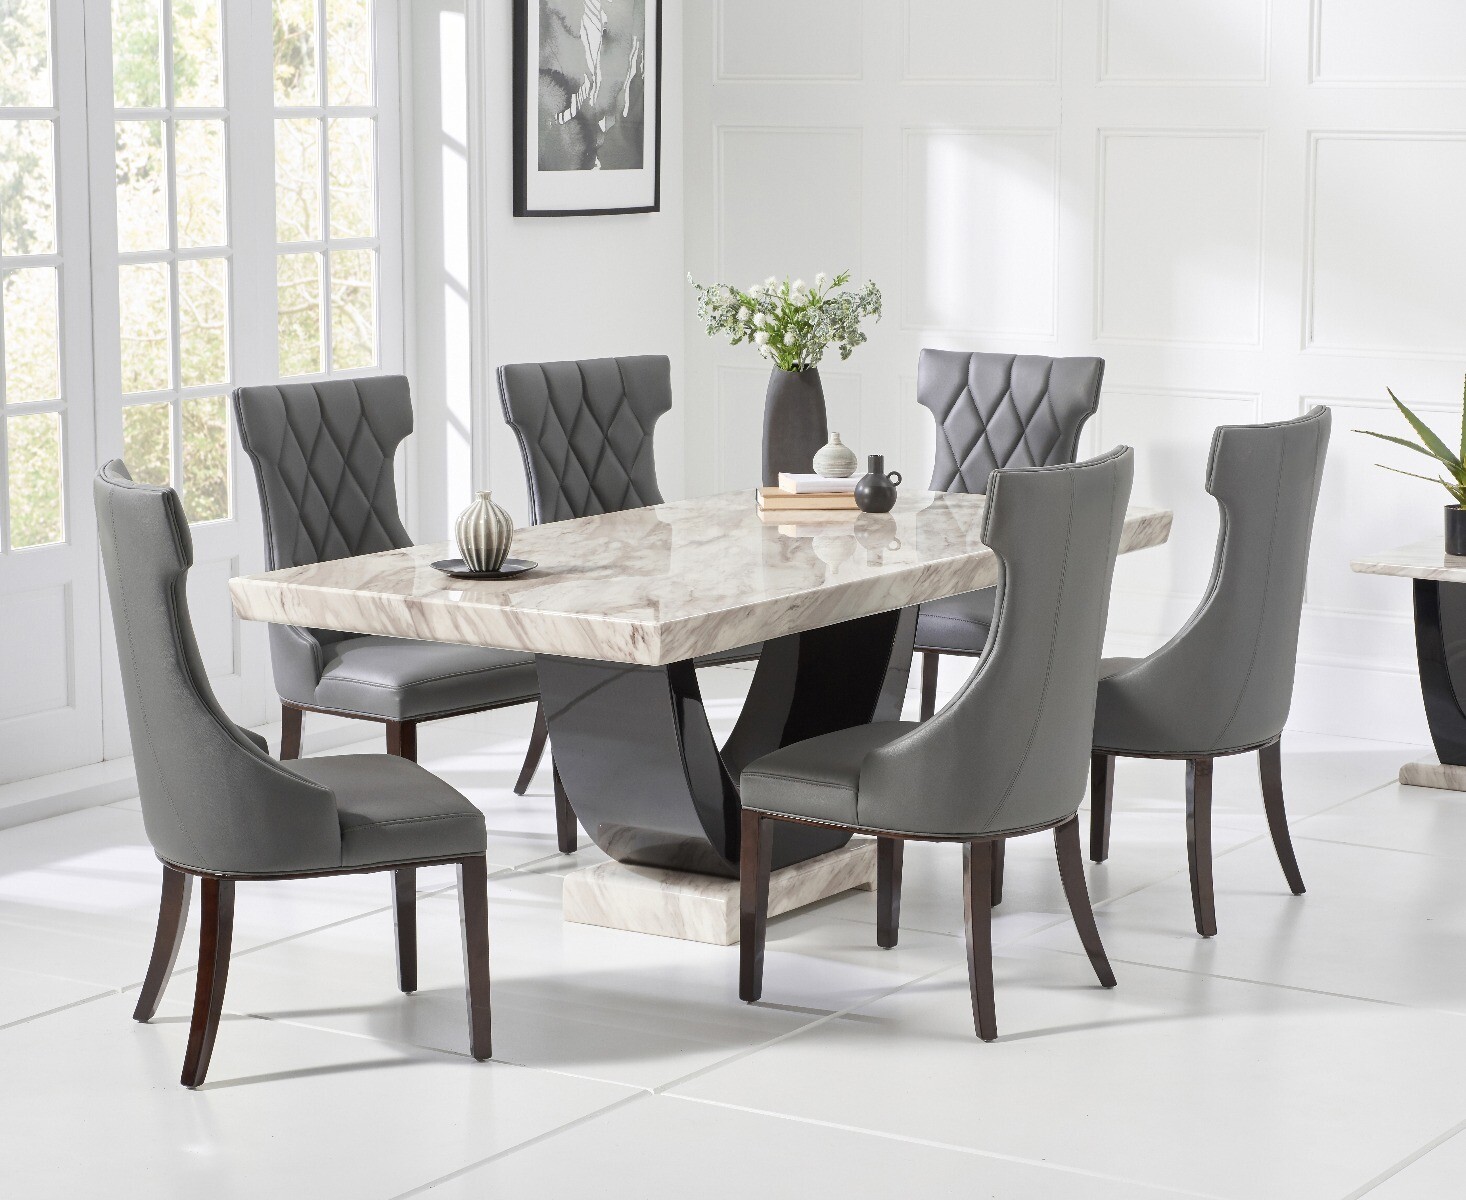 Photo 1 of Raphael 170cm cream and black pedestal marble dining table with 6 cream sophia chairs